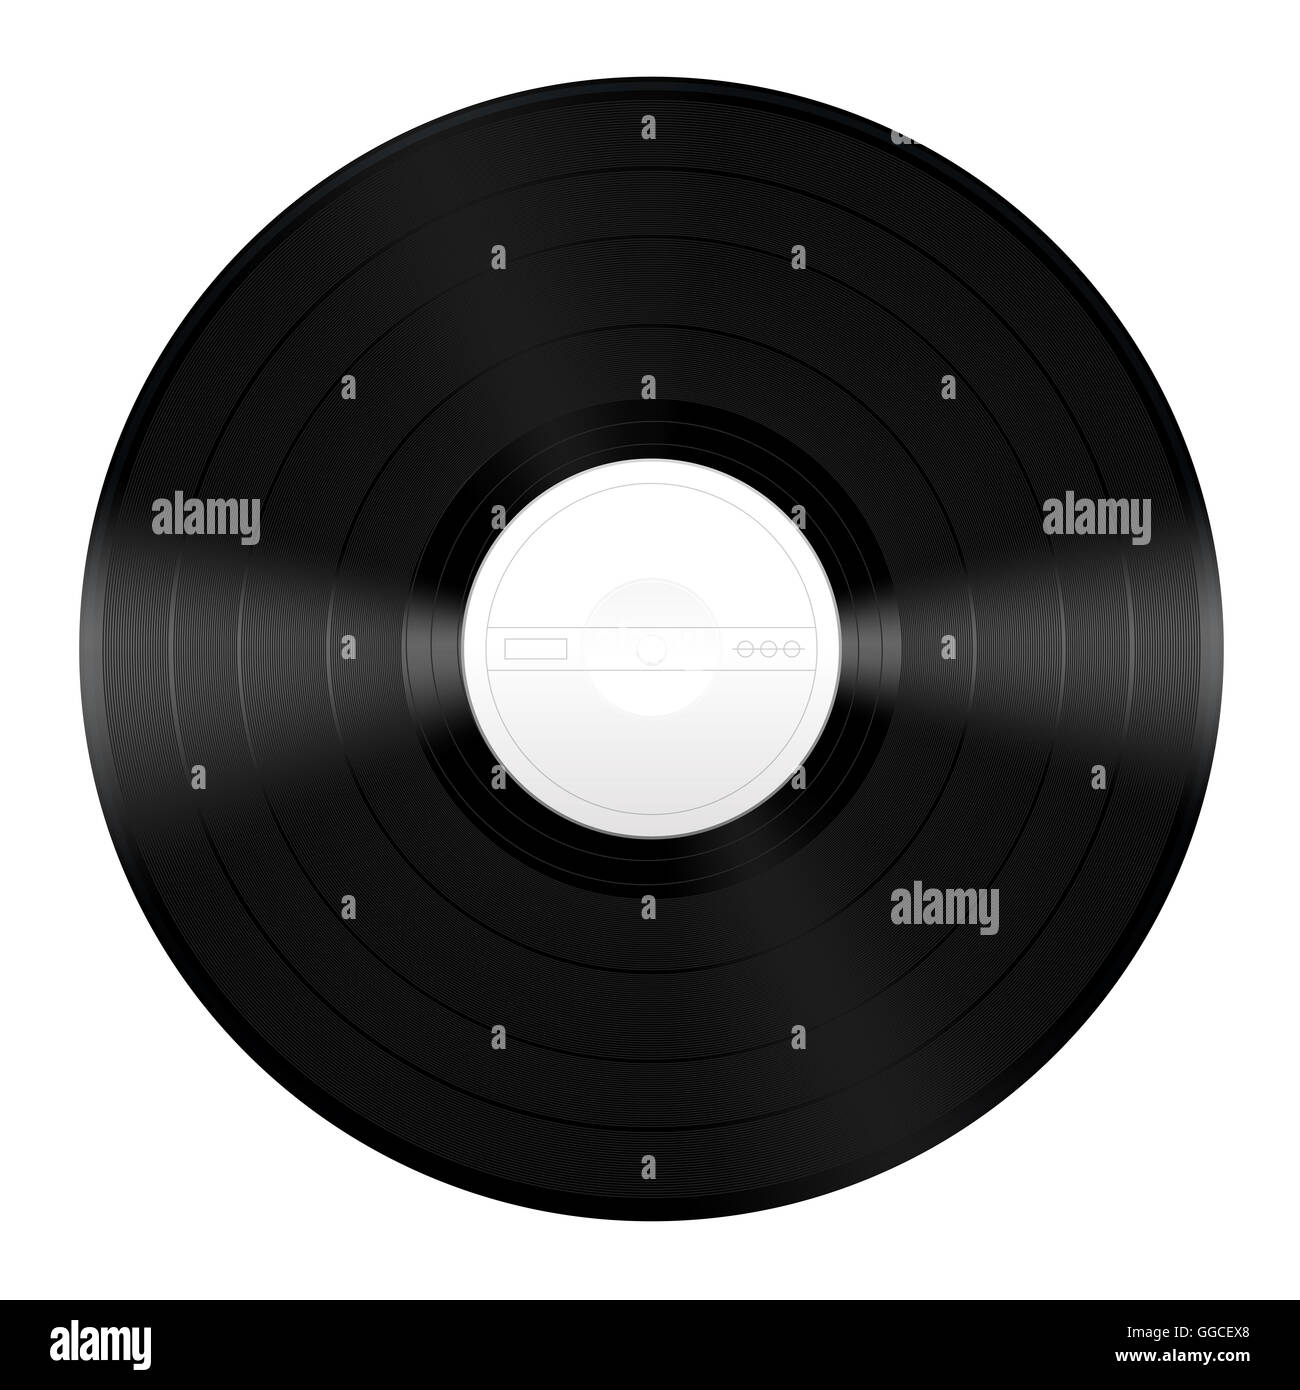 Vinyl music record with unlabeled white center. Stock Photo